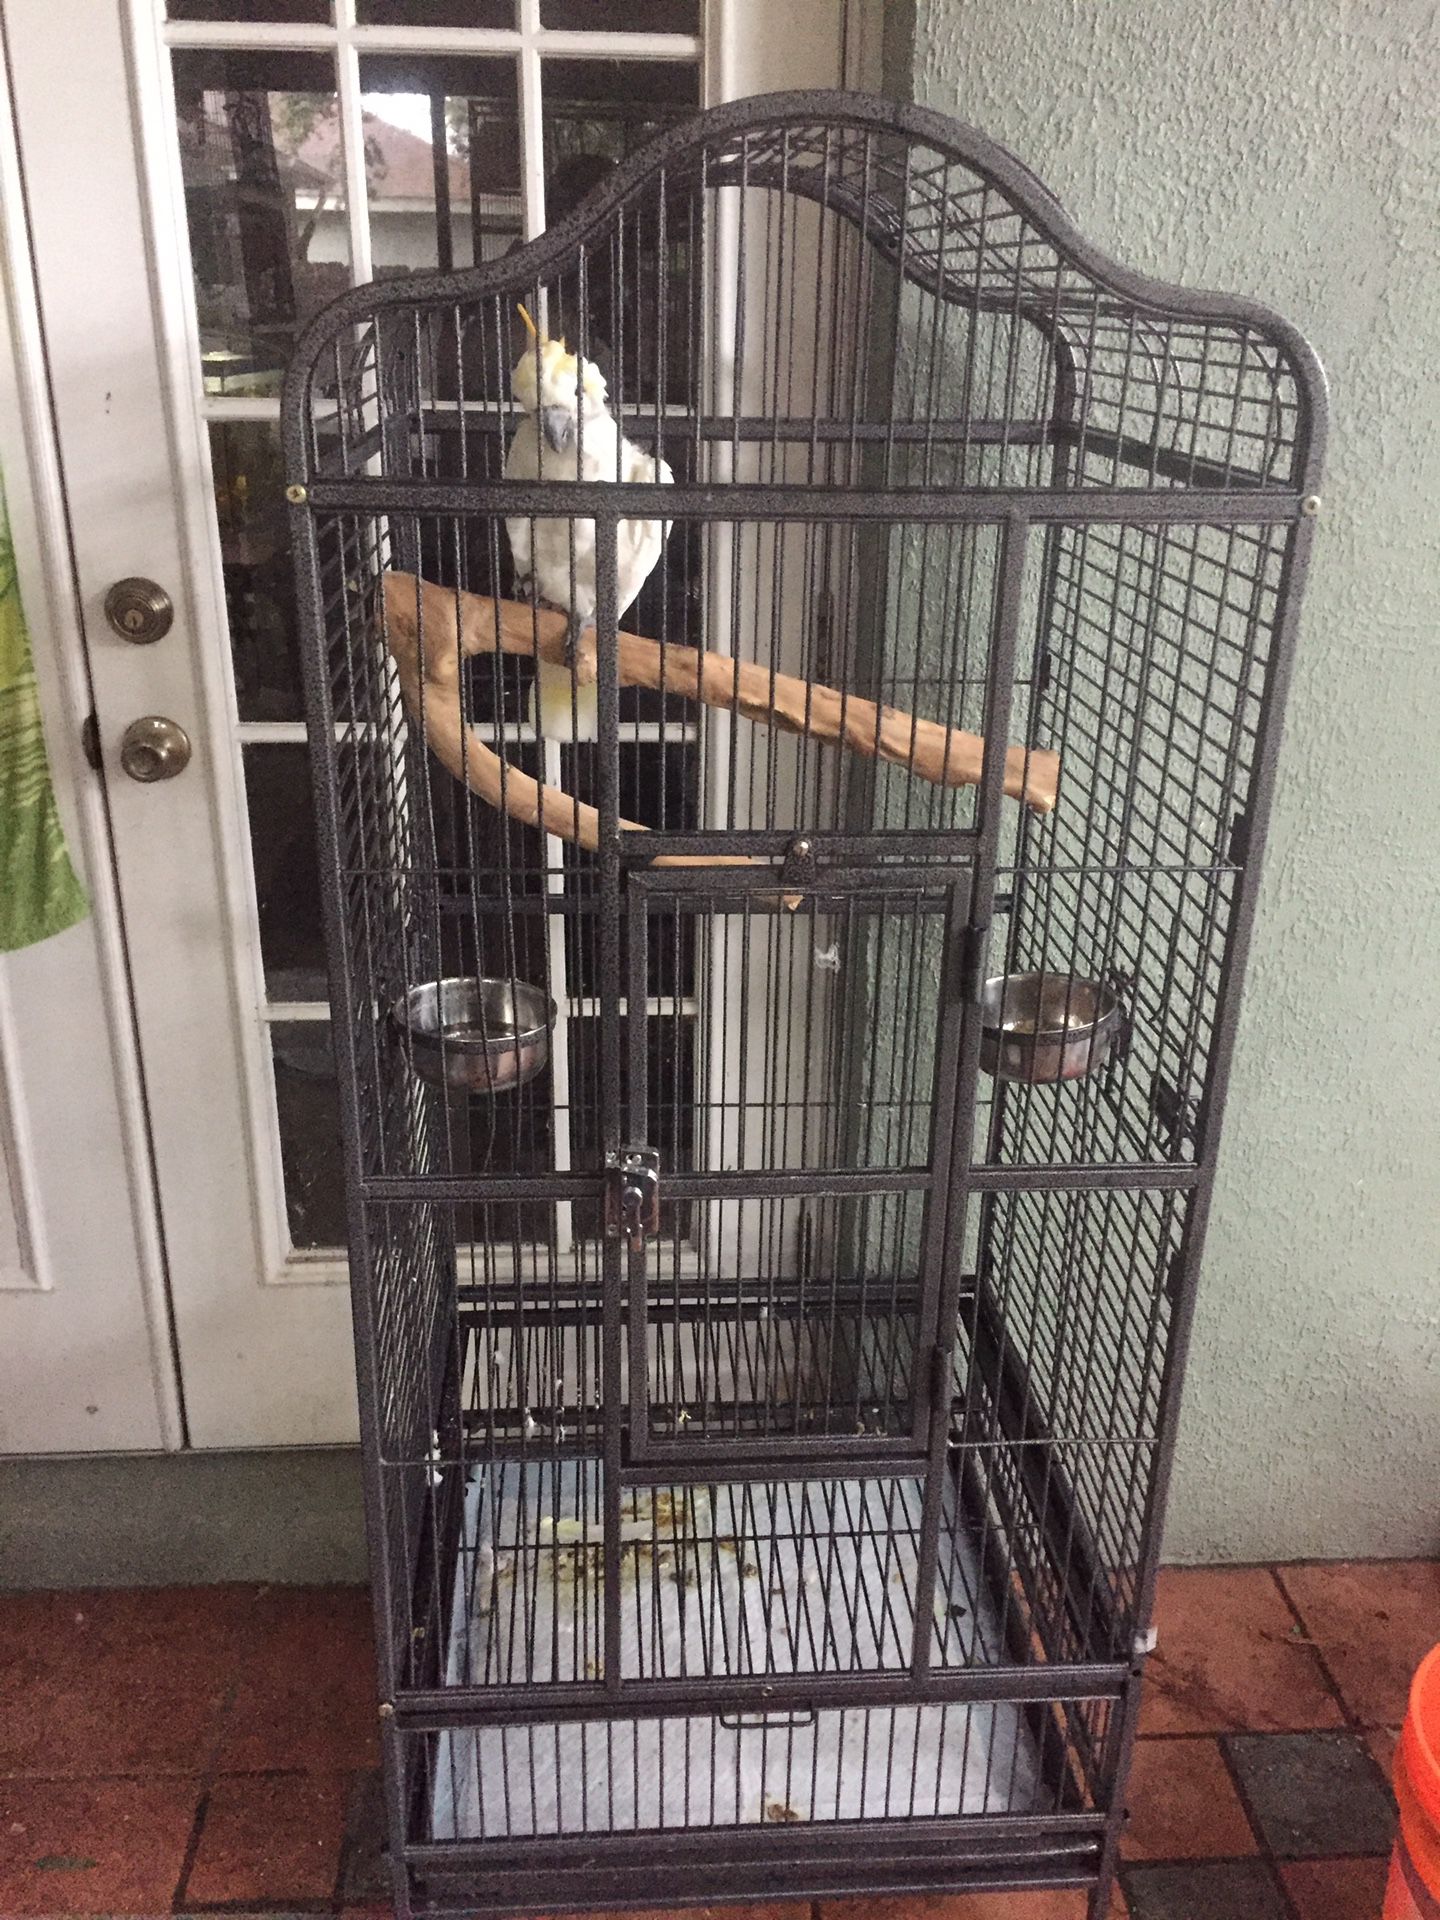 Parrot cage at a steal of a price!